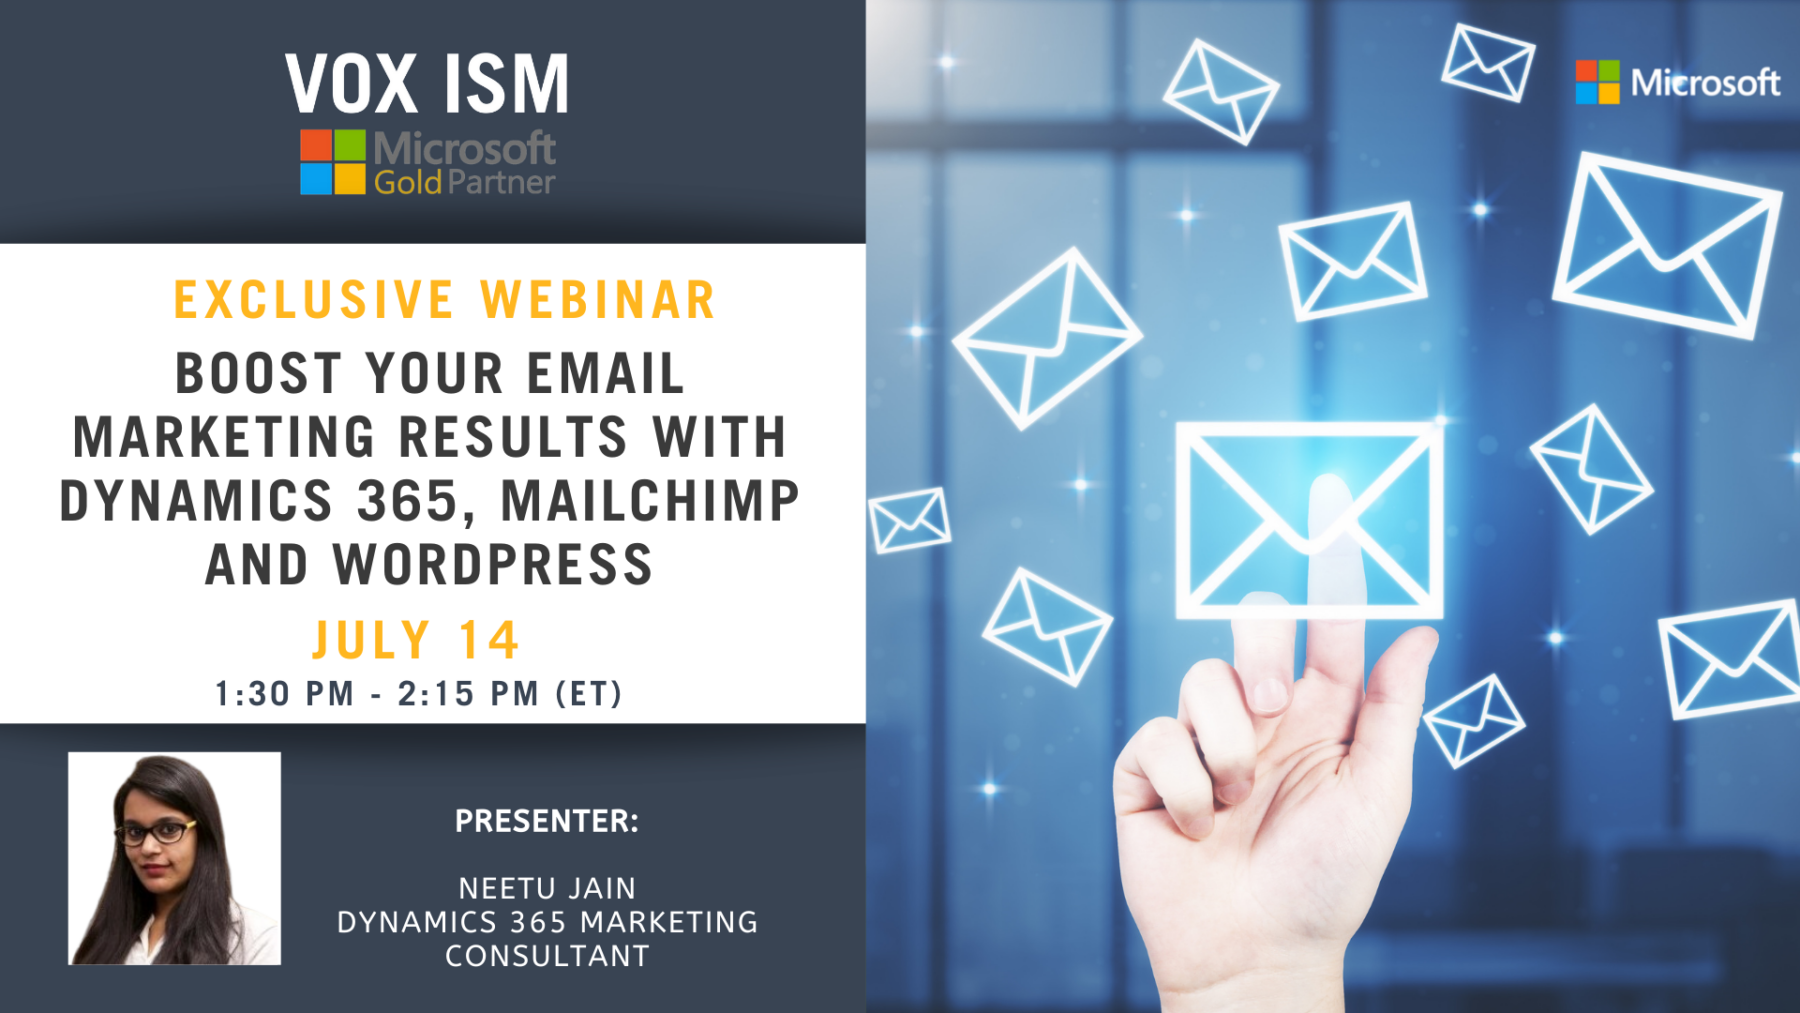 Boost your email marketing results with Dynamics 365, MailChimp and WordPress - July 14 - Webinar